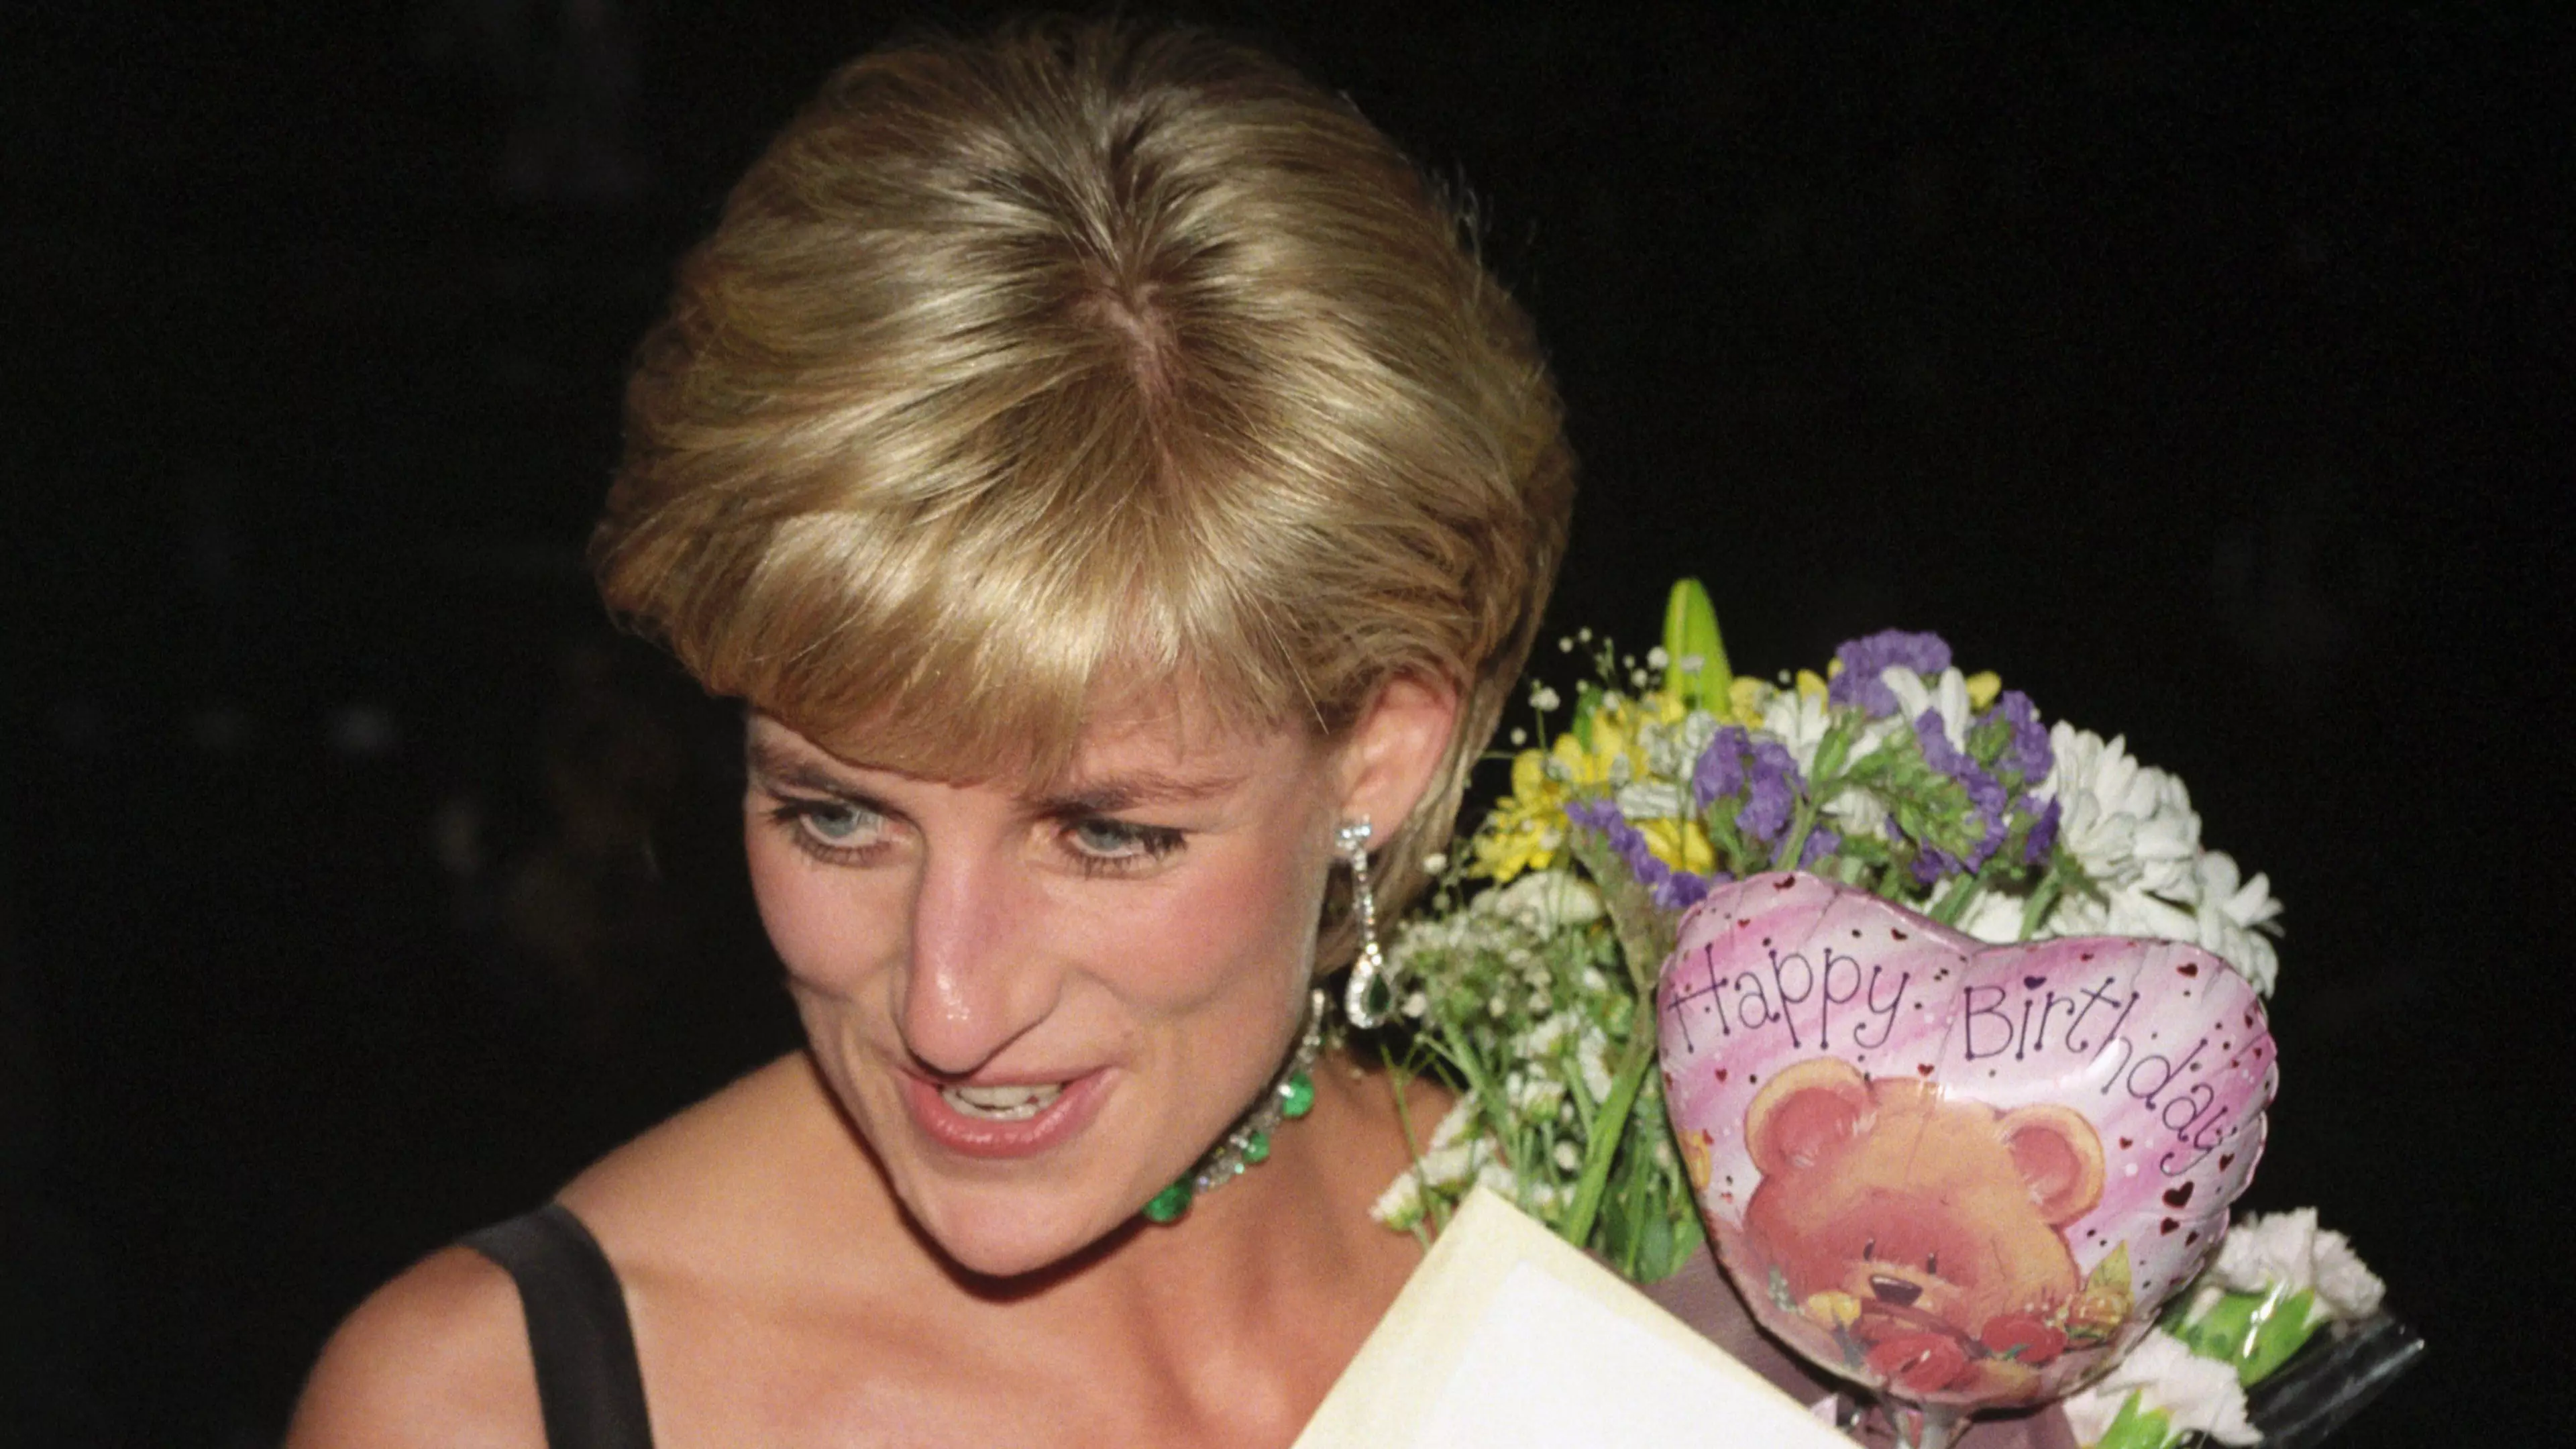 ITV To Air New Princess Diana Documentary Featuring Rarely Seen Footage For Her 60th Birthday